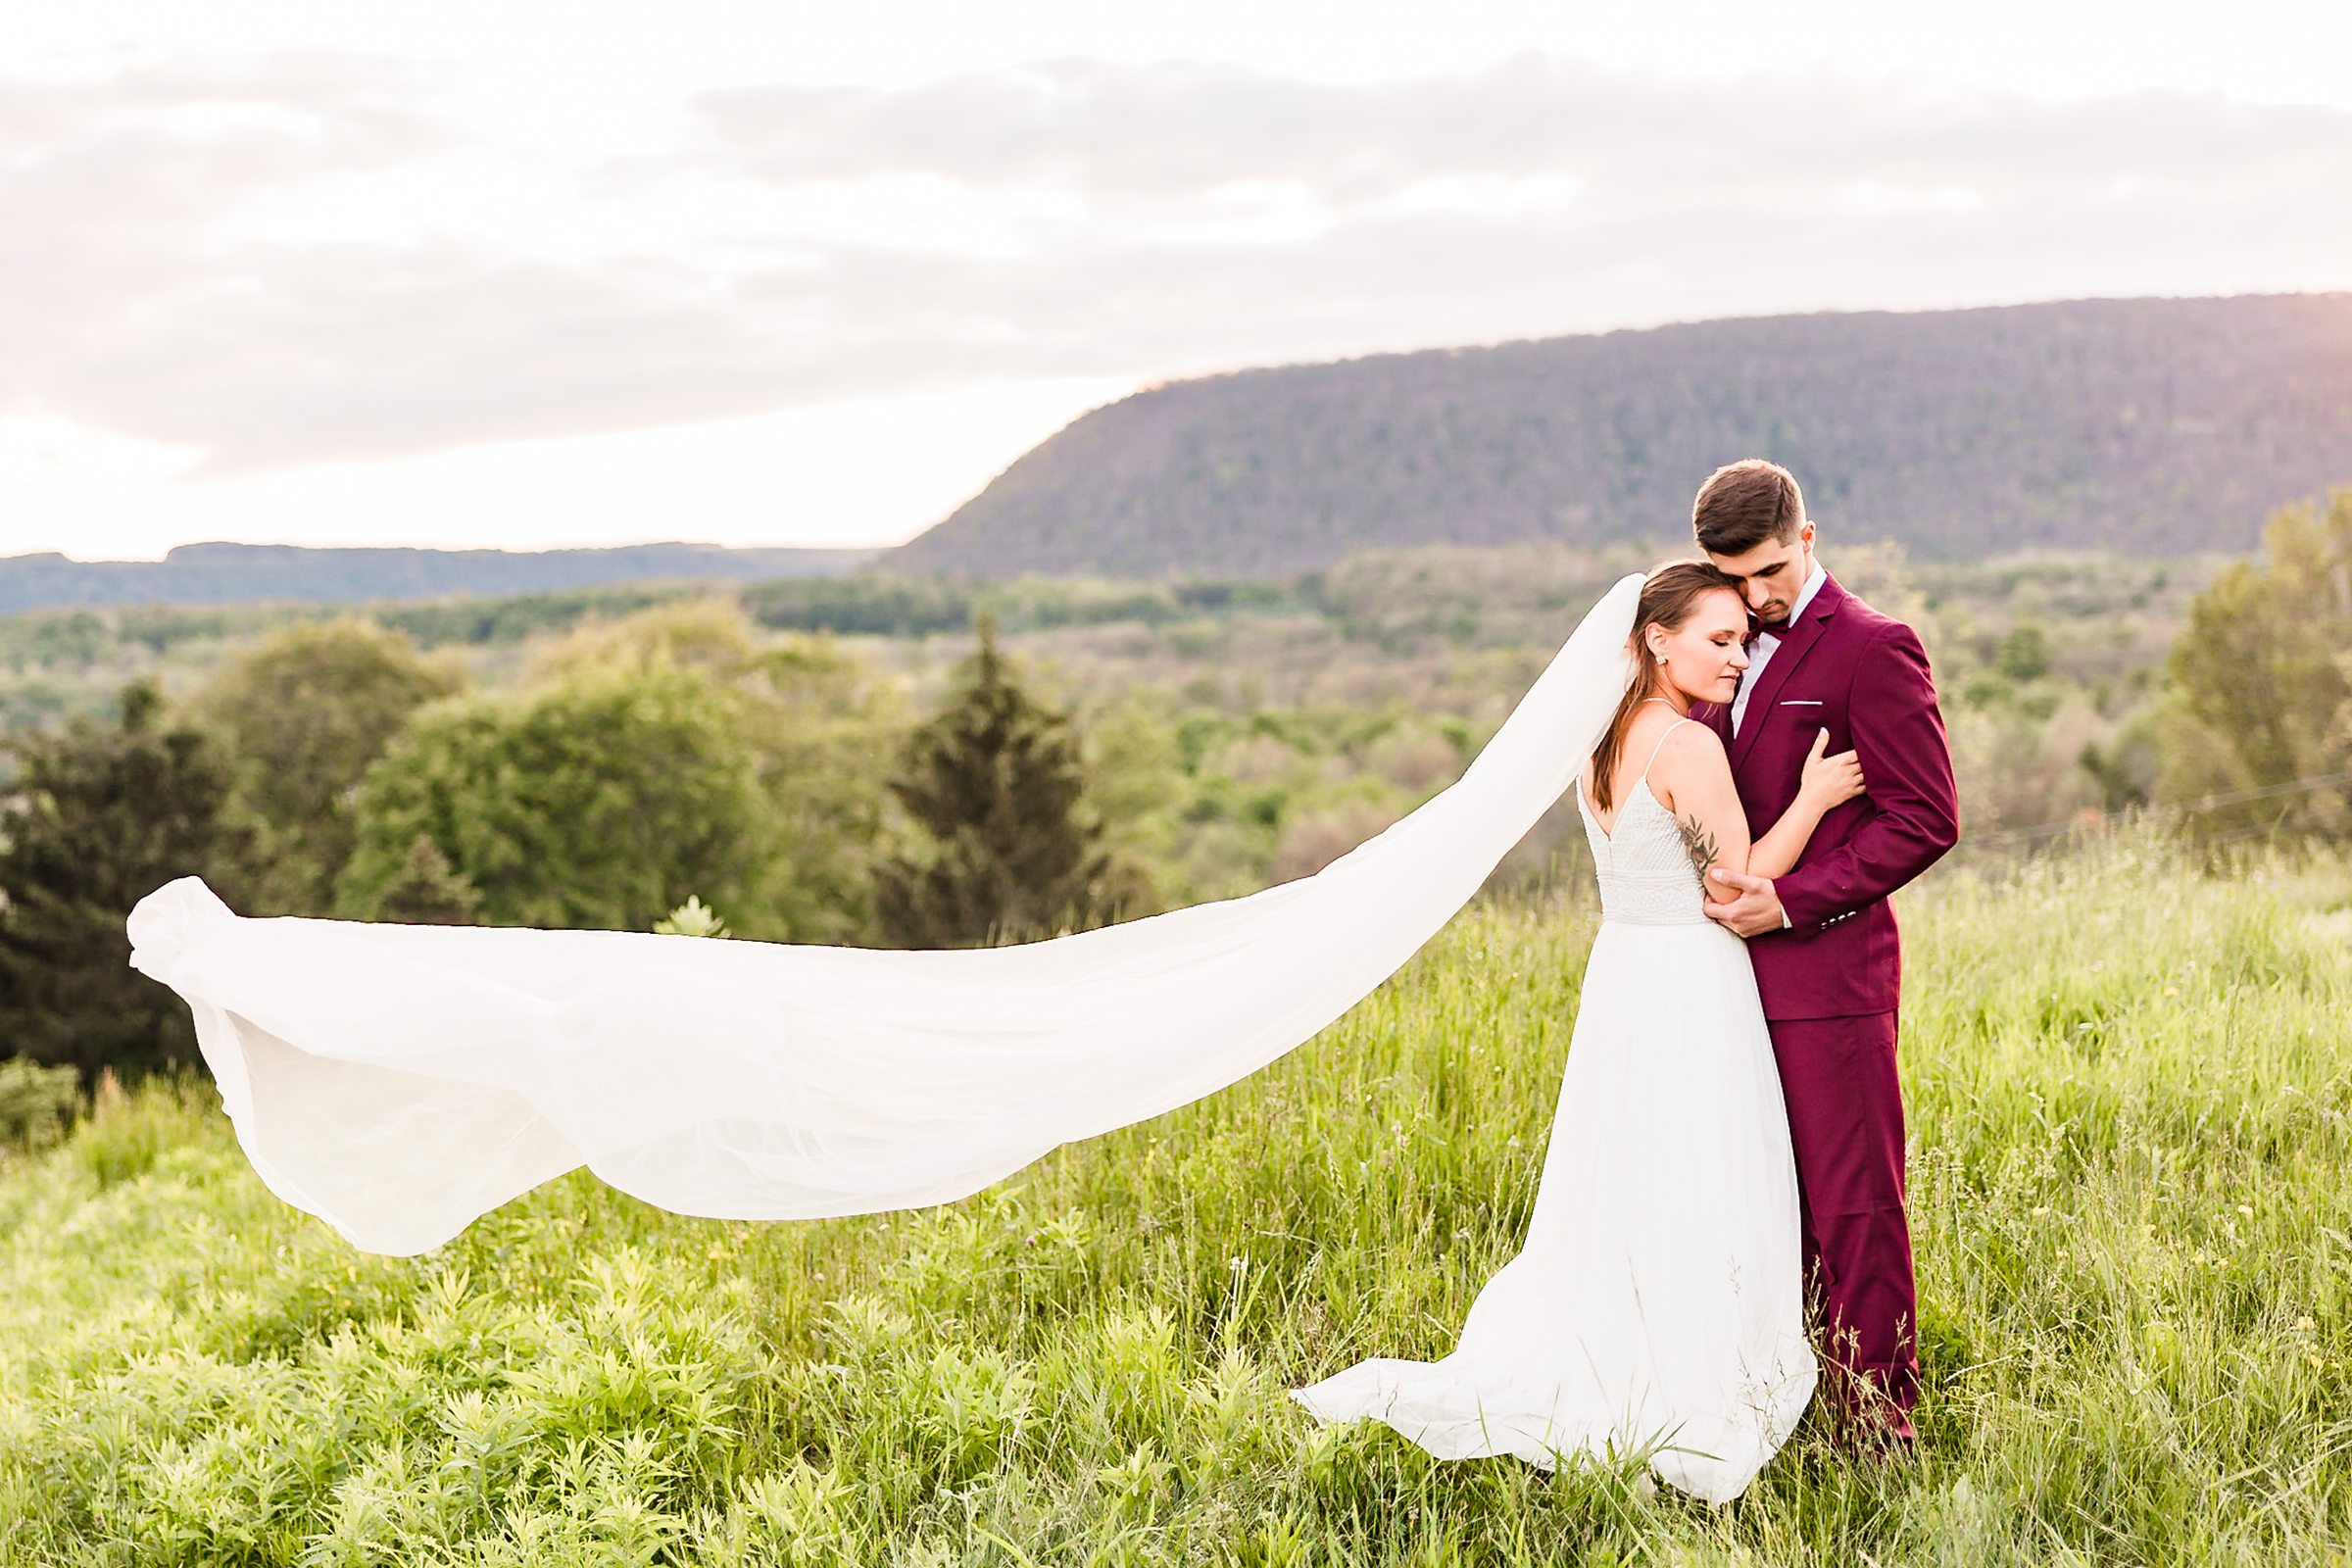 Bride and Groom celebrate getting married at the Wren's Roost Barn Venue in Naples, New York.